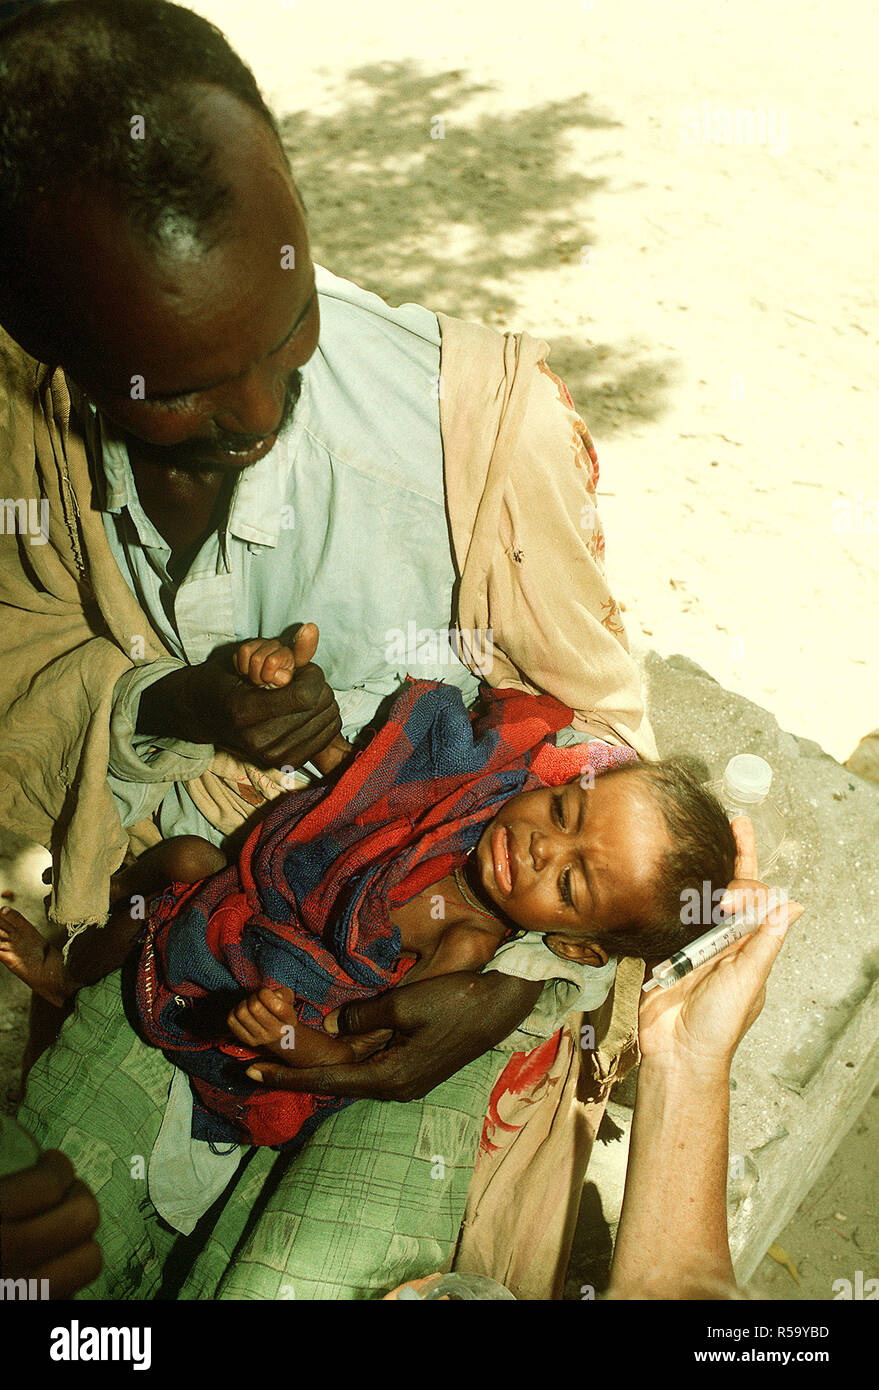 1993 - A Somali refugee child cries after being given water through a syringe at an aid station set up during Operation Restore hope relief efforts. (Bardera Somalia) Stock Photo